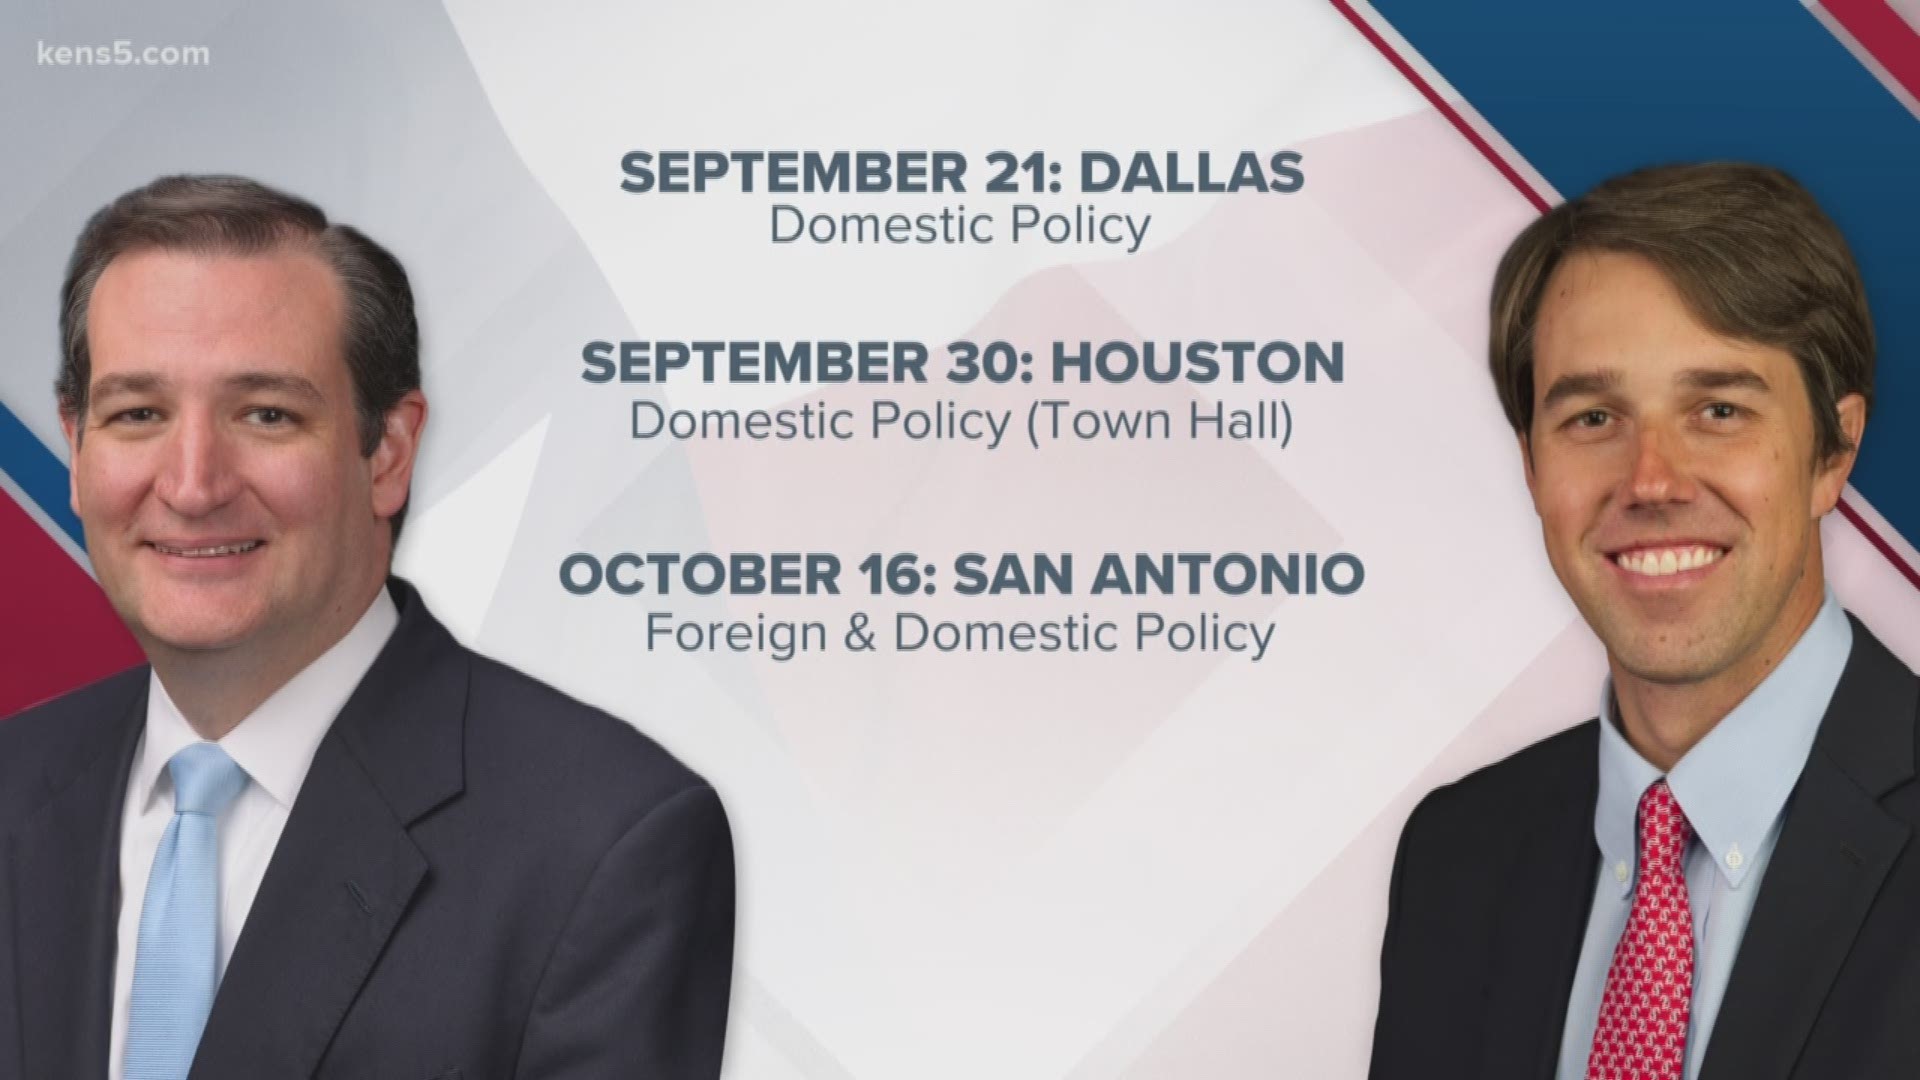 The first debate takes place in Dallas at SMU.